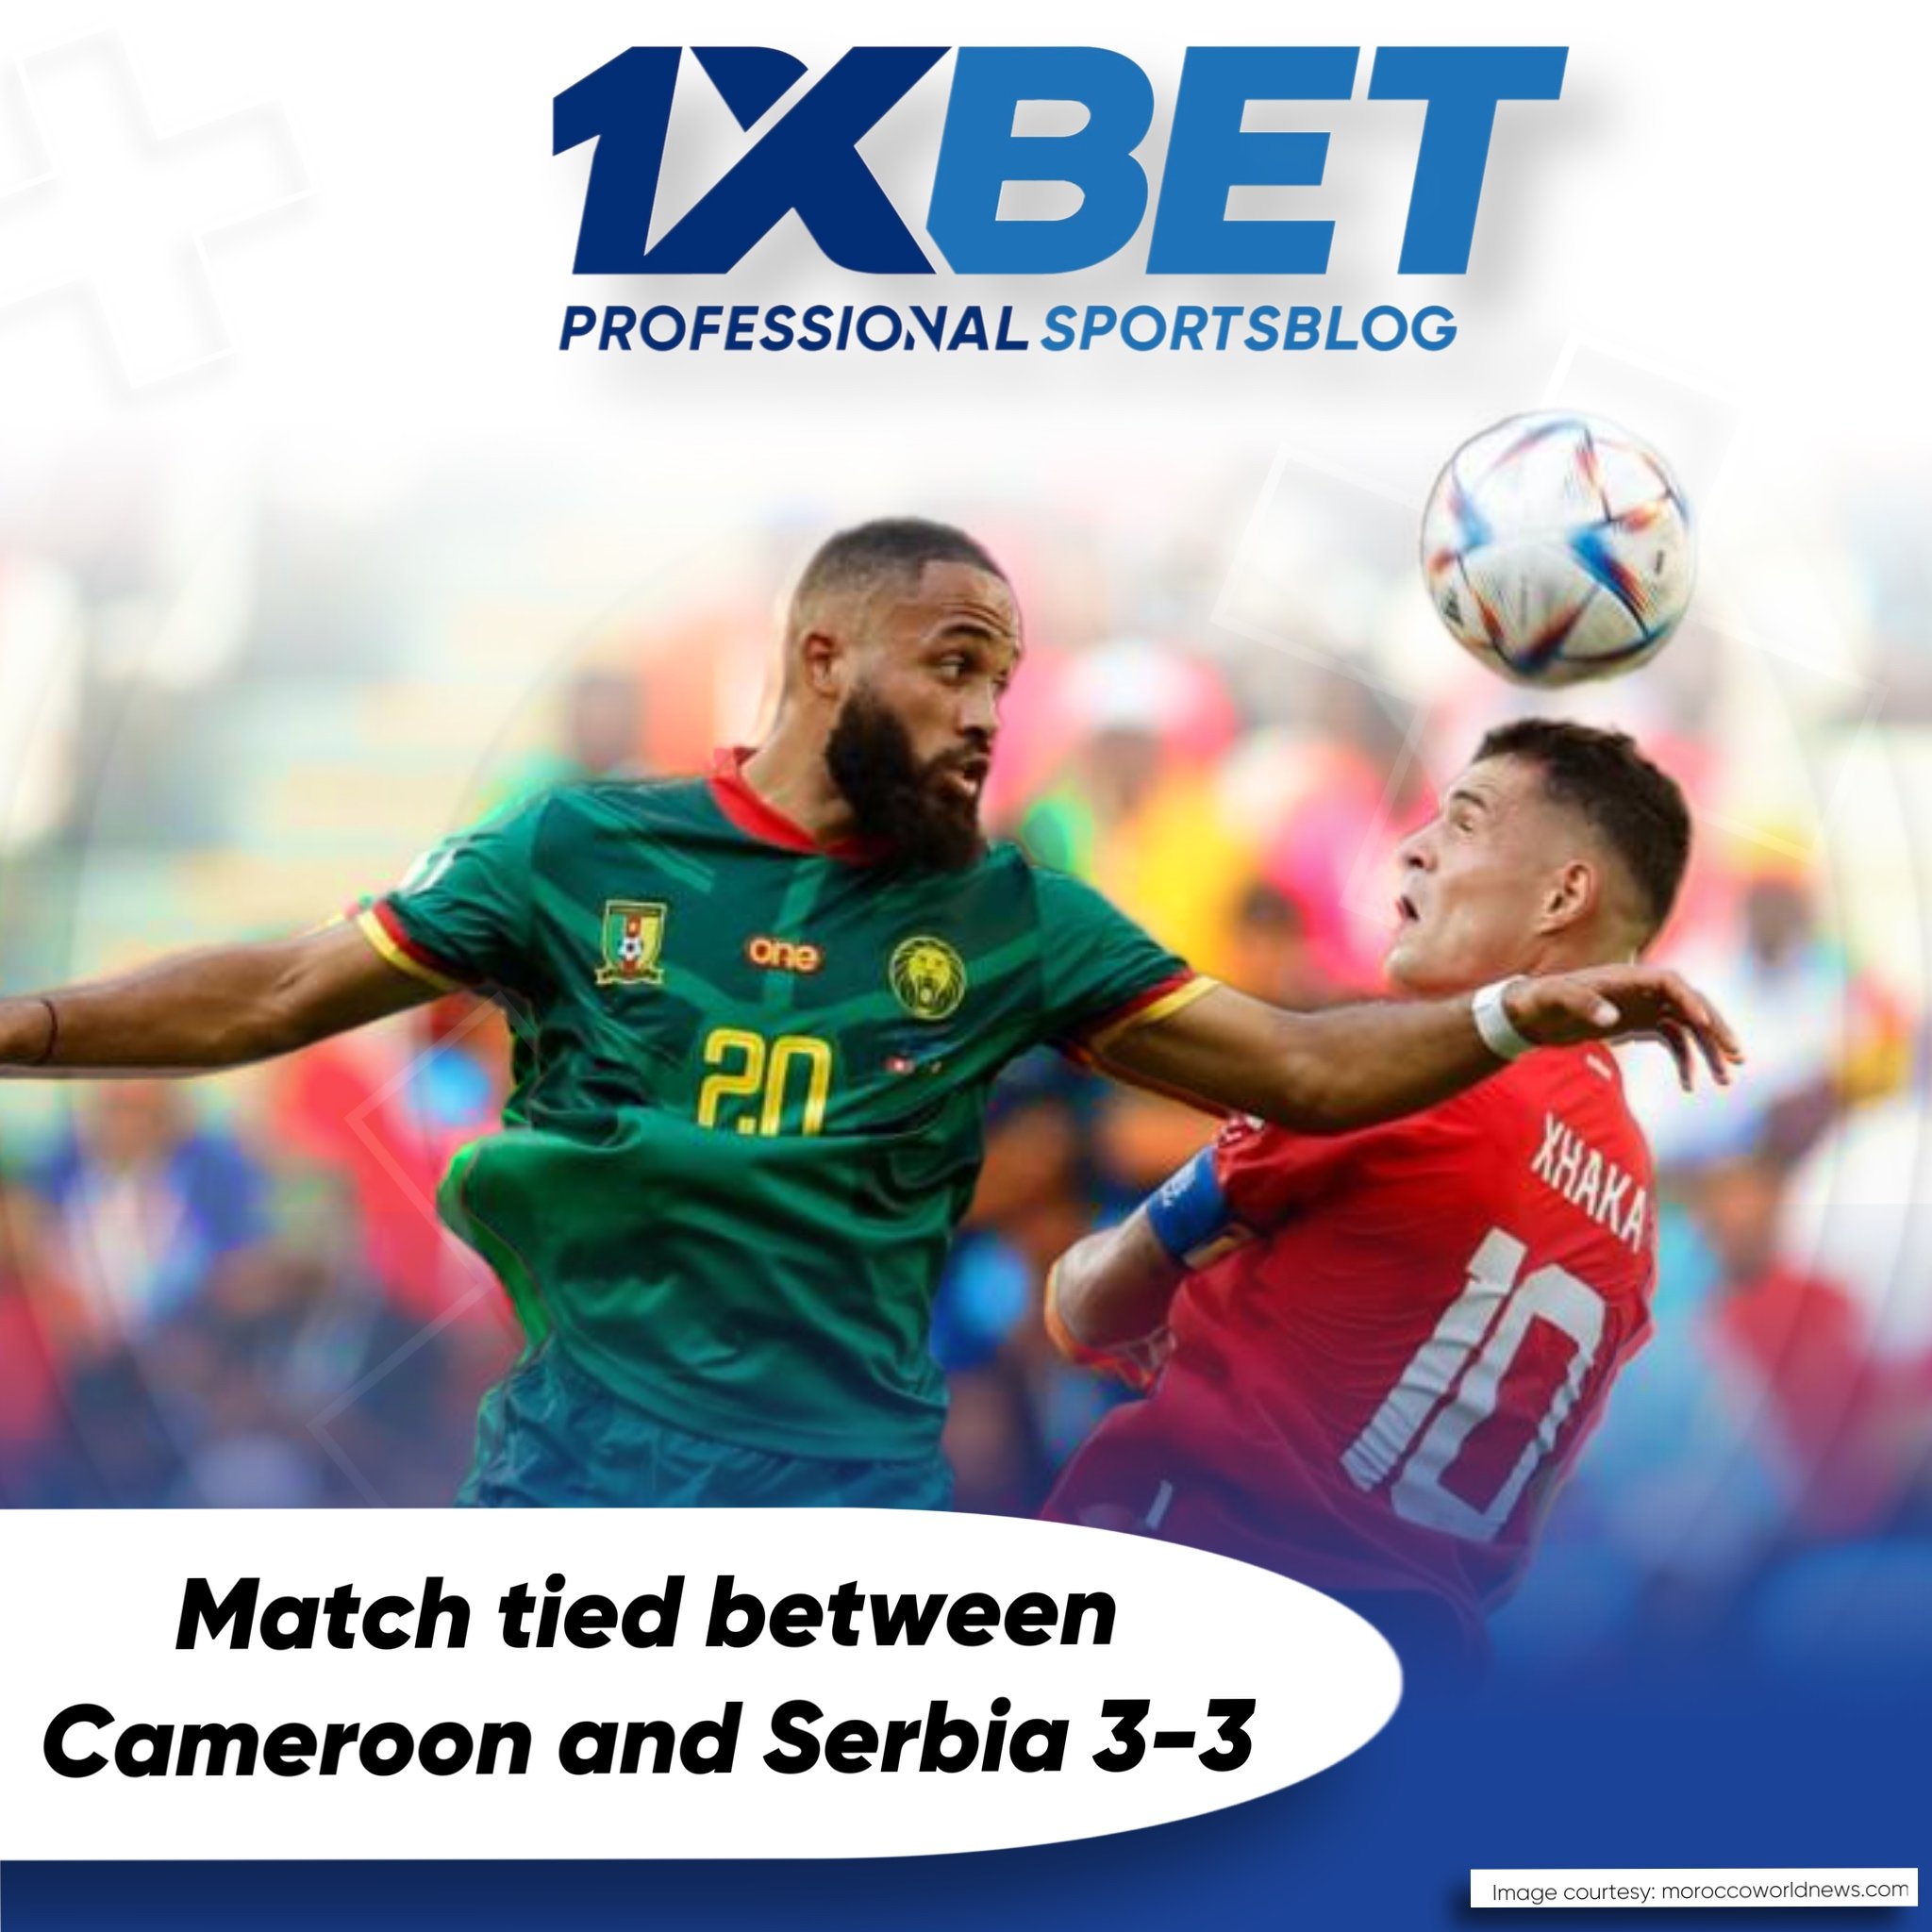 Match tied between Cameroon and Serbia 3-3